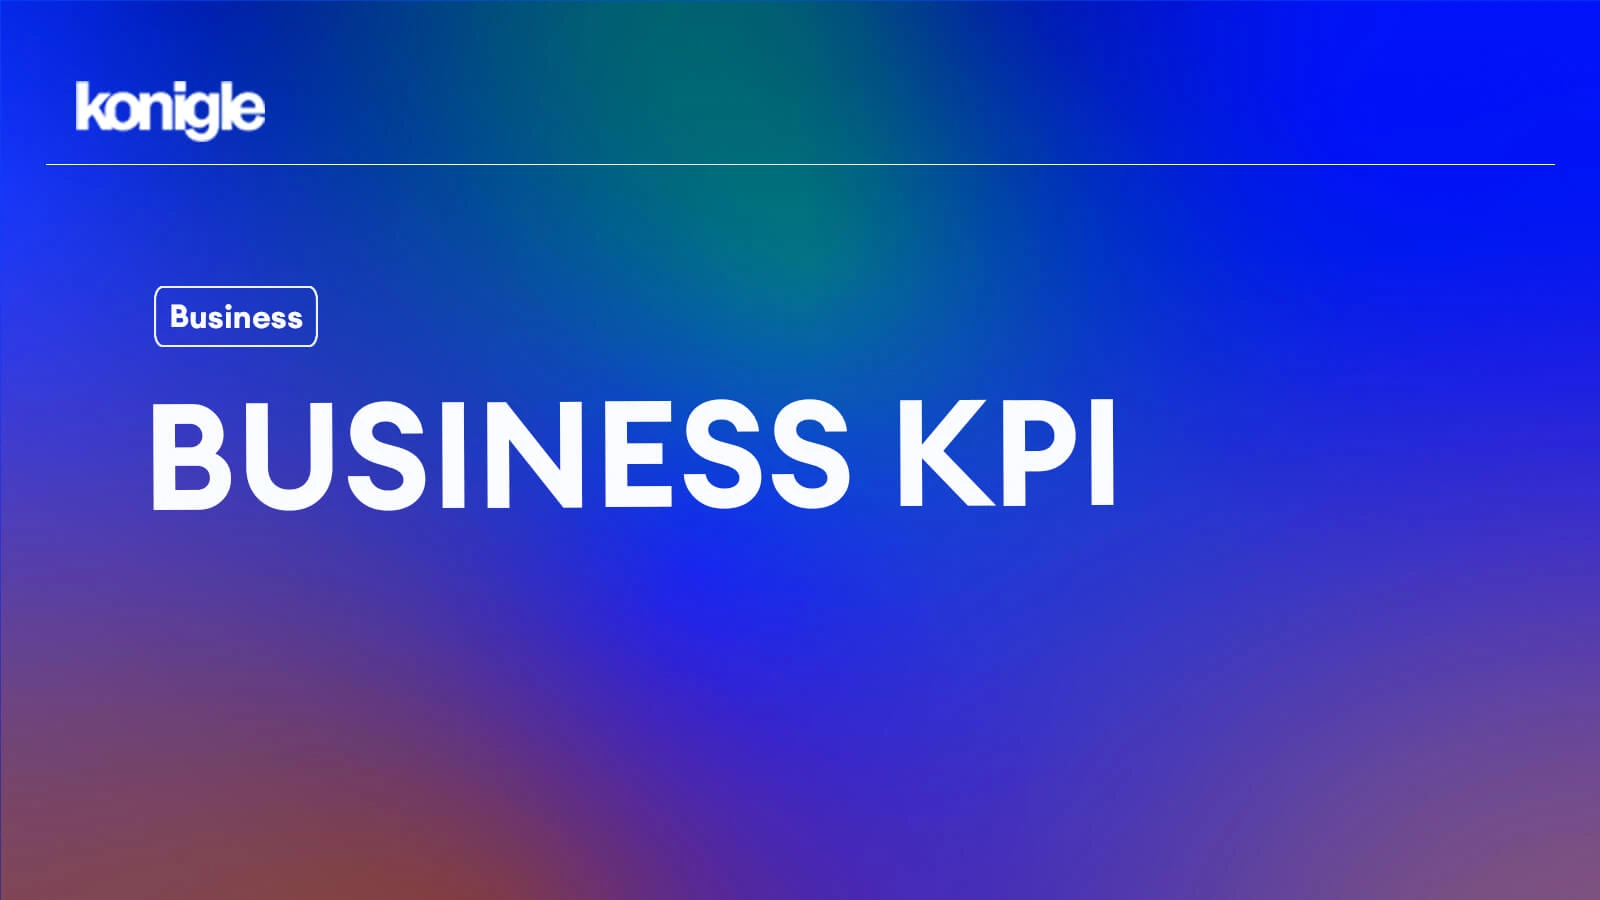 How to set and track KPIs targets that actually lead to business growth